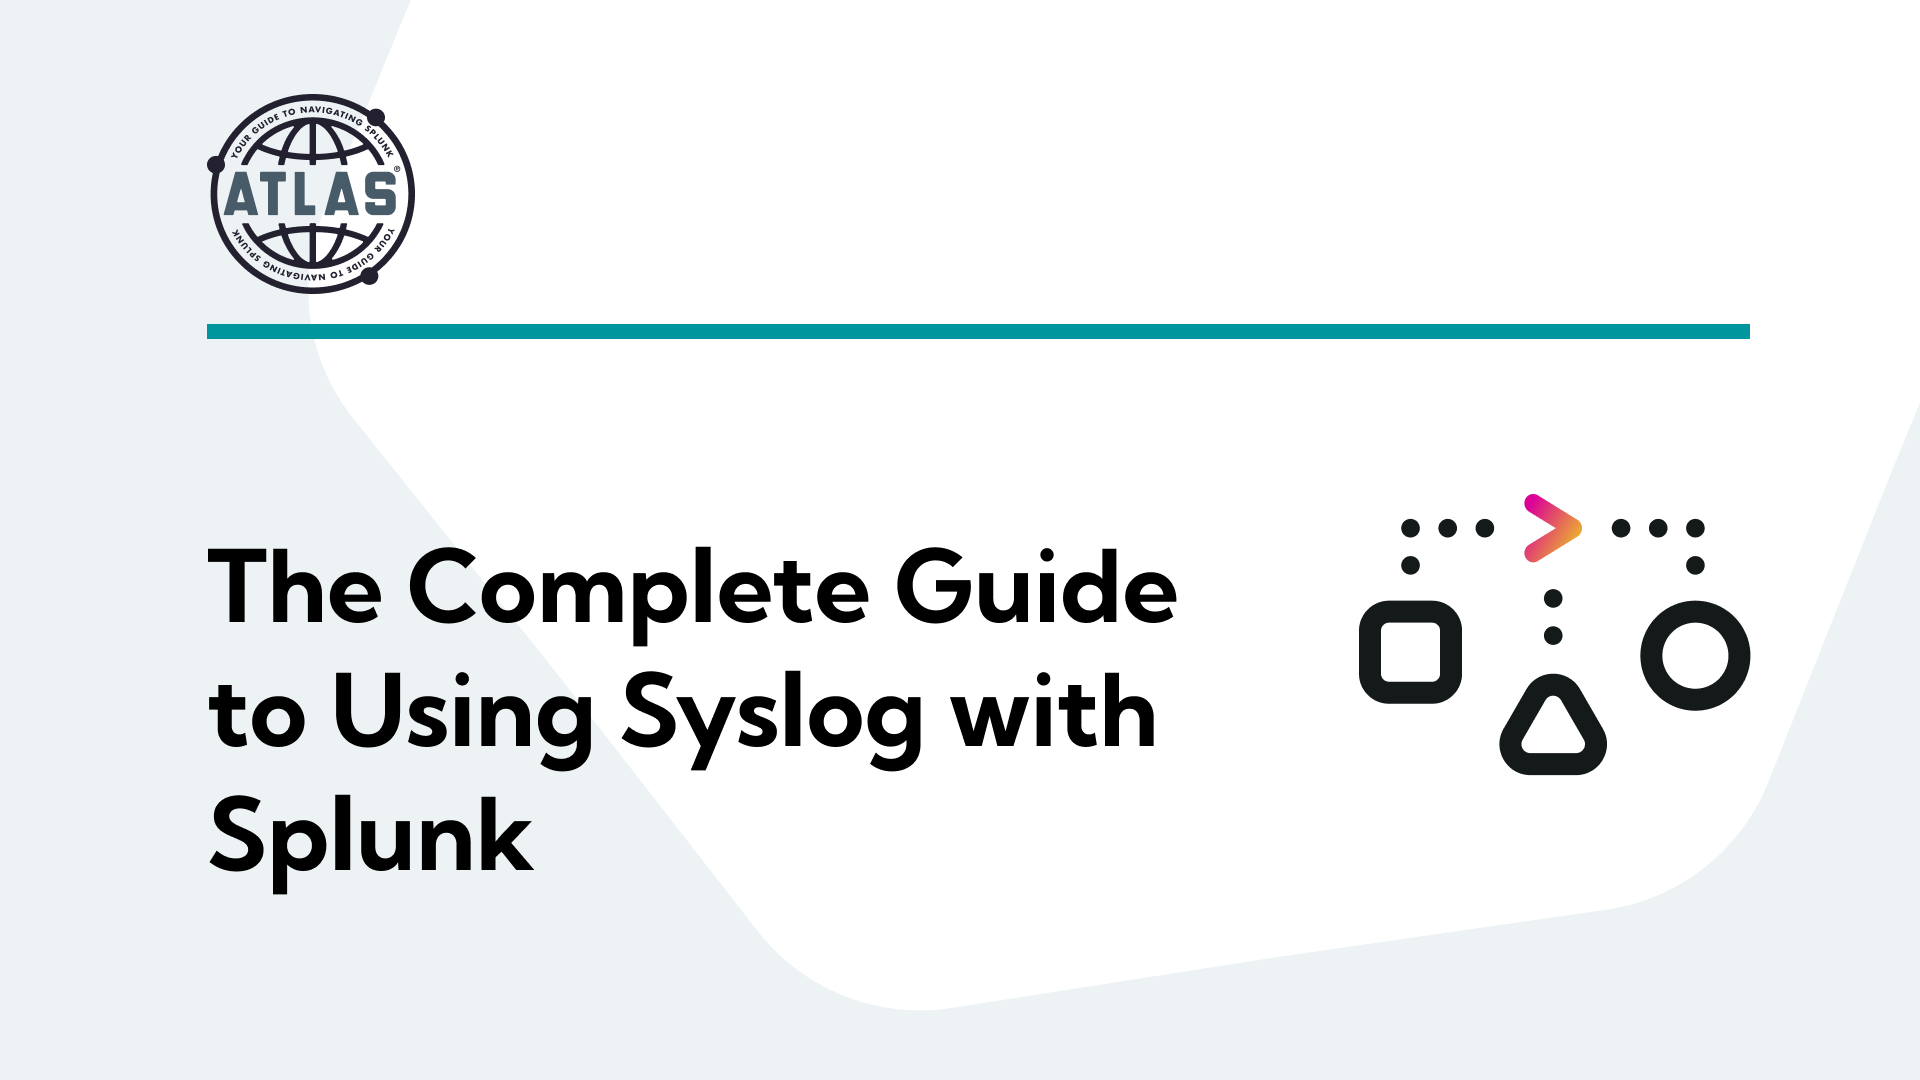 The Complete Guide to Using Syslog with Splunk